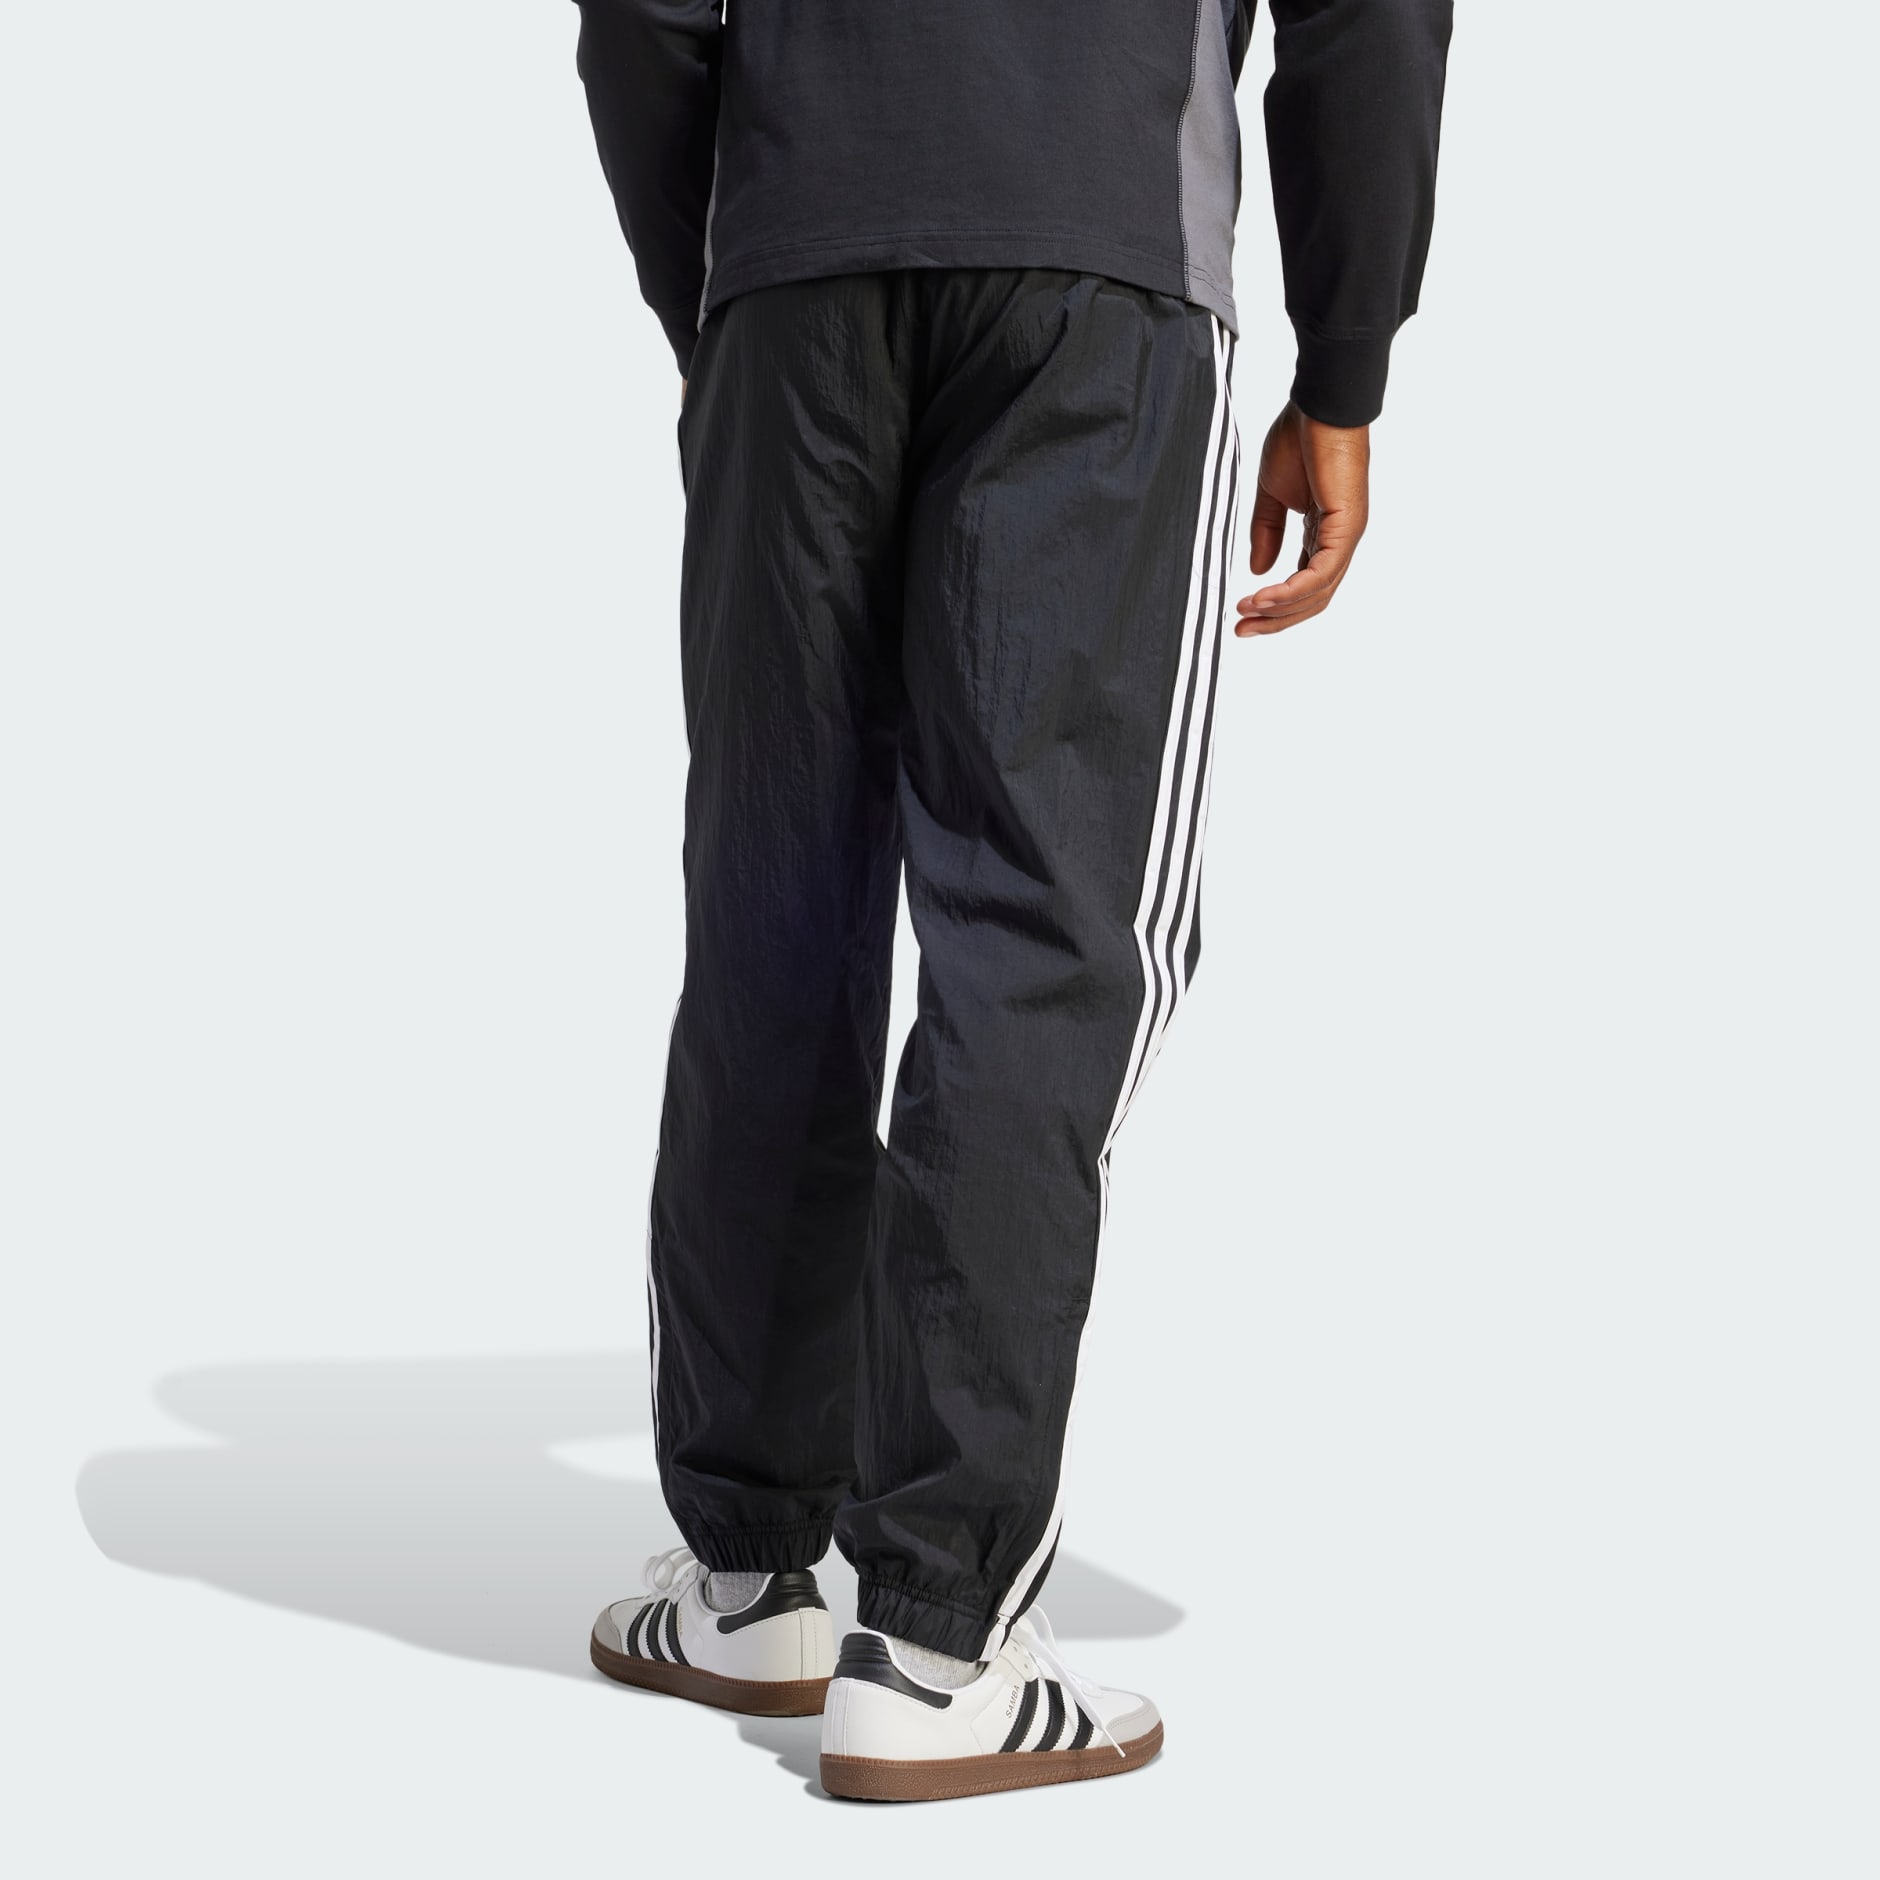 PUMA Woven Pants CH Solid Men Blue Track Pants - Buy PUMA Woven Pants CH  Solid Men Blue Track Pants Online at Best Prices in India | Flipkart.com